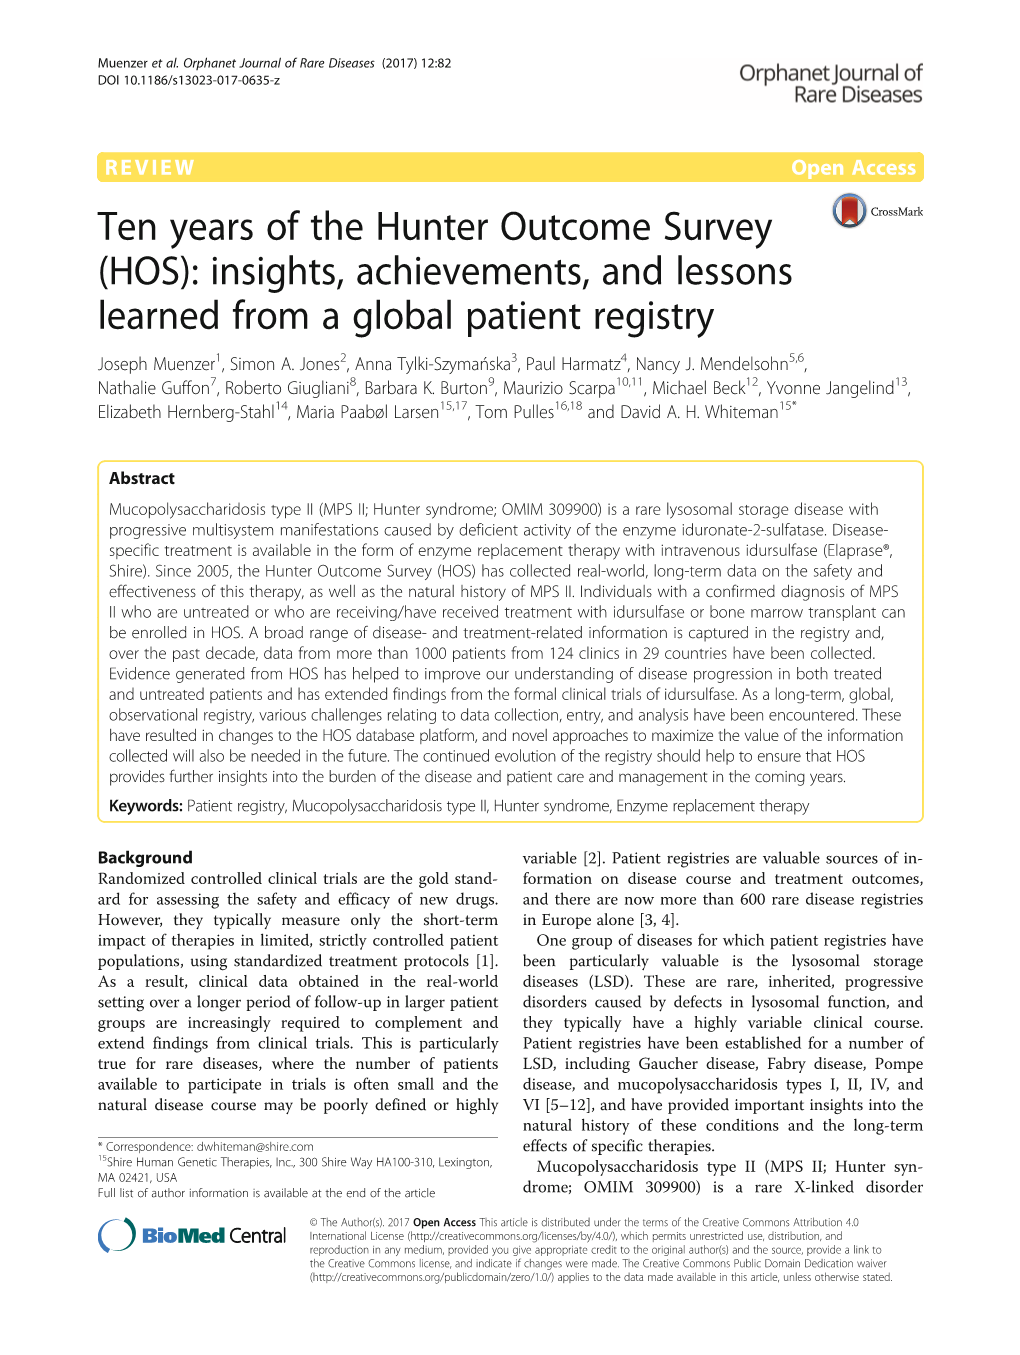 Ten Years of the Hunter Outcome Survey (HOS): Insights, Achievements, and Lessons Learned from a Global Patient Registry Joseph Muenzer1, Simon A